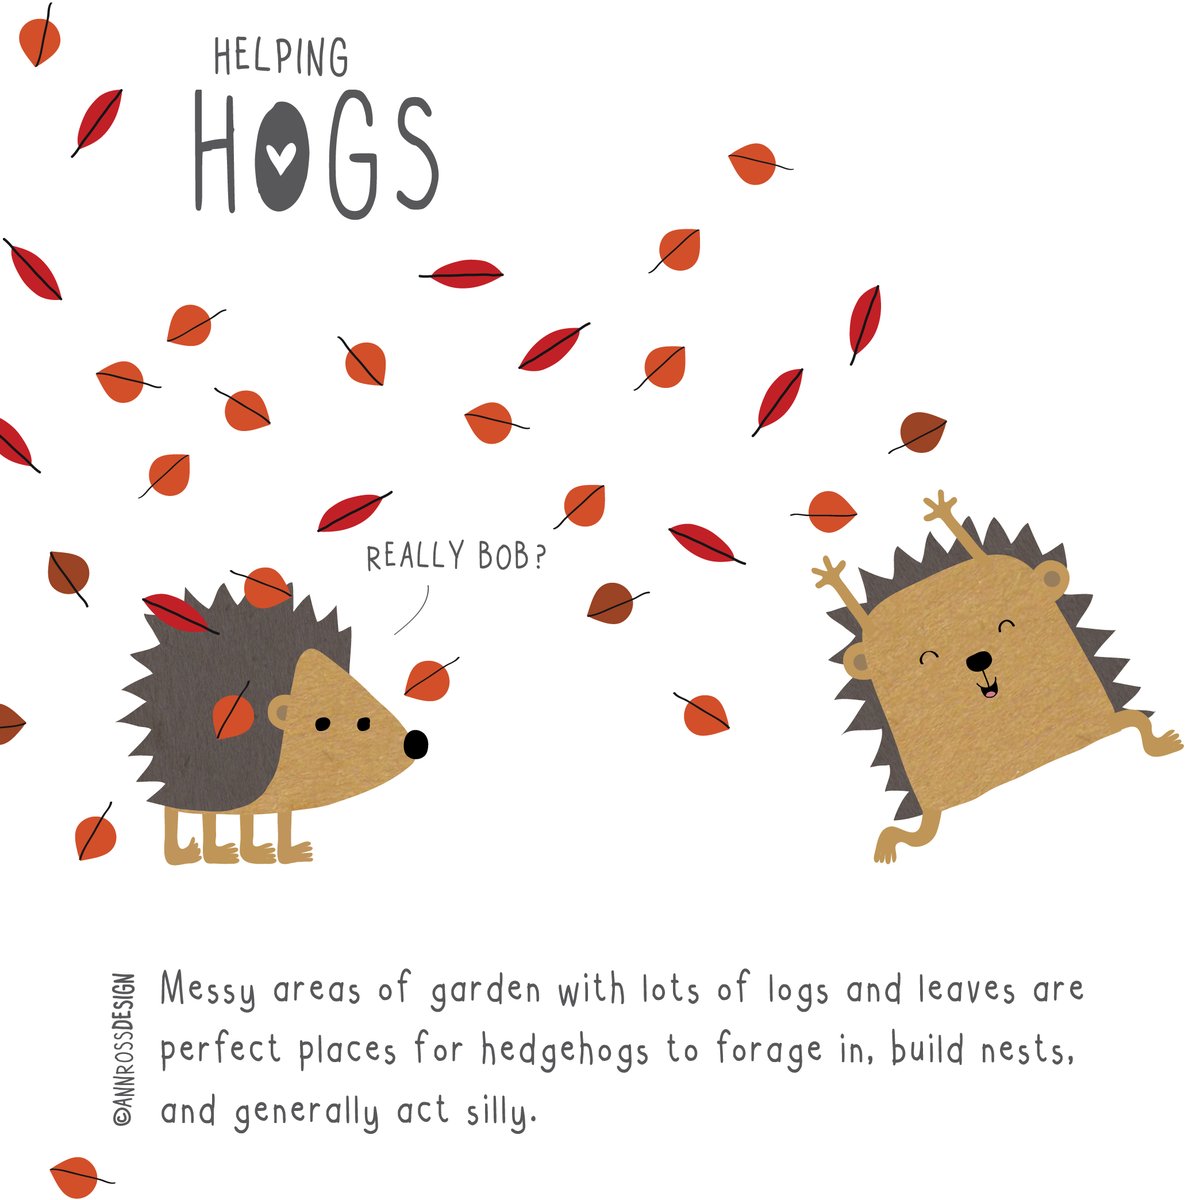 One of my older designs, but I do like this little guy!

Have a happy day 😊

(More hog helping posters can be found at annrossdesign.com)

#hedgehogs #helpinghedgehogs #wildlife #wildlifegardening #nature #annrossdesign #thefutureisunmown